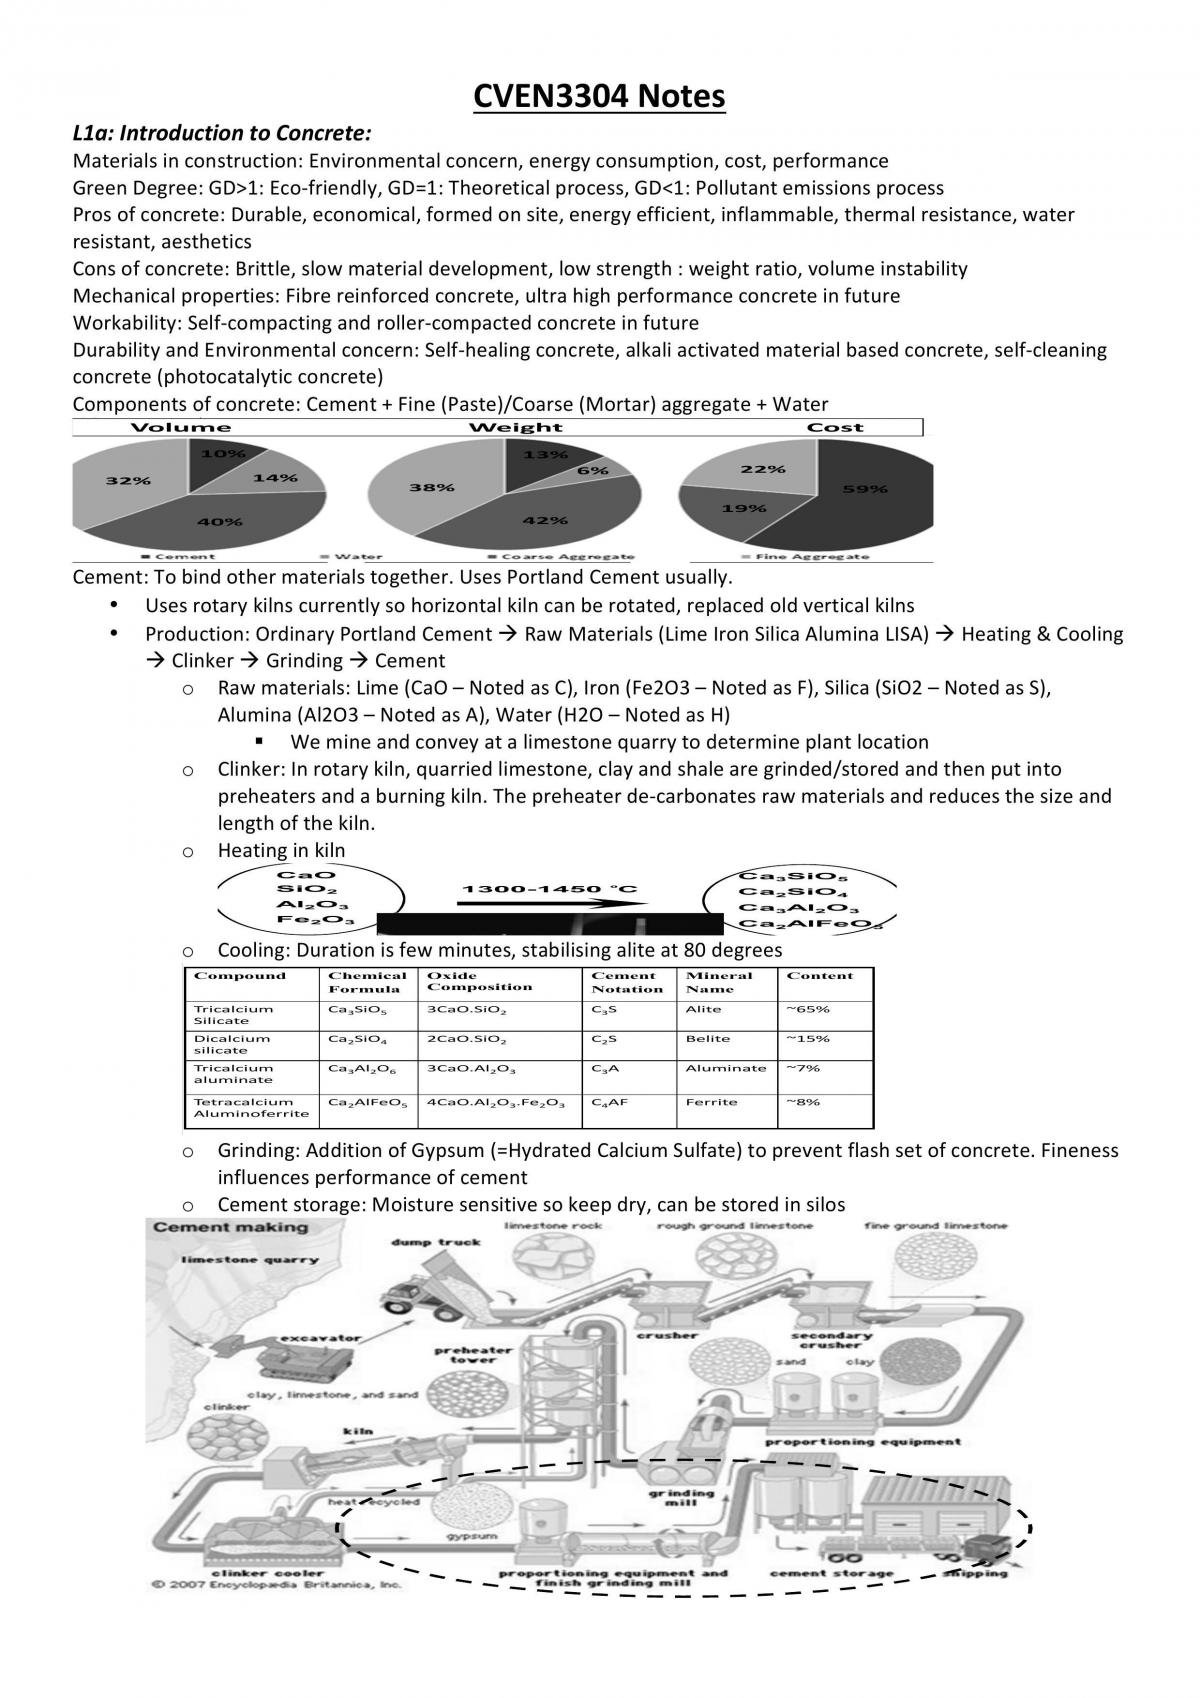 Full notes on Concrete Materials - Page 1